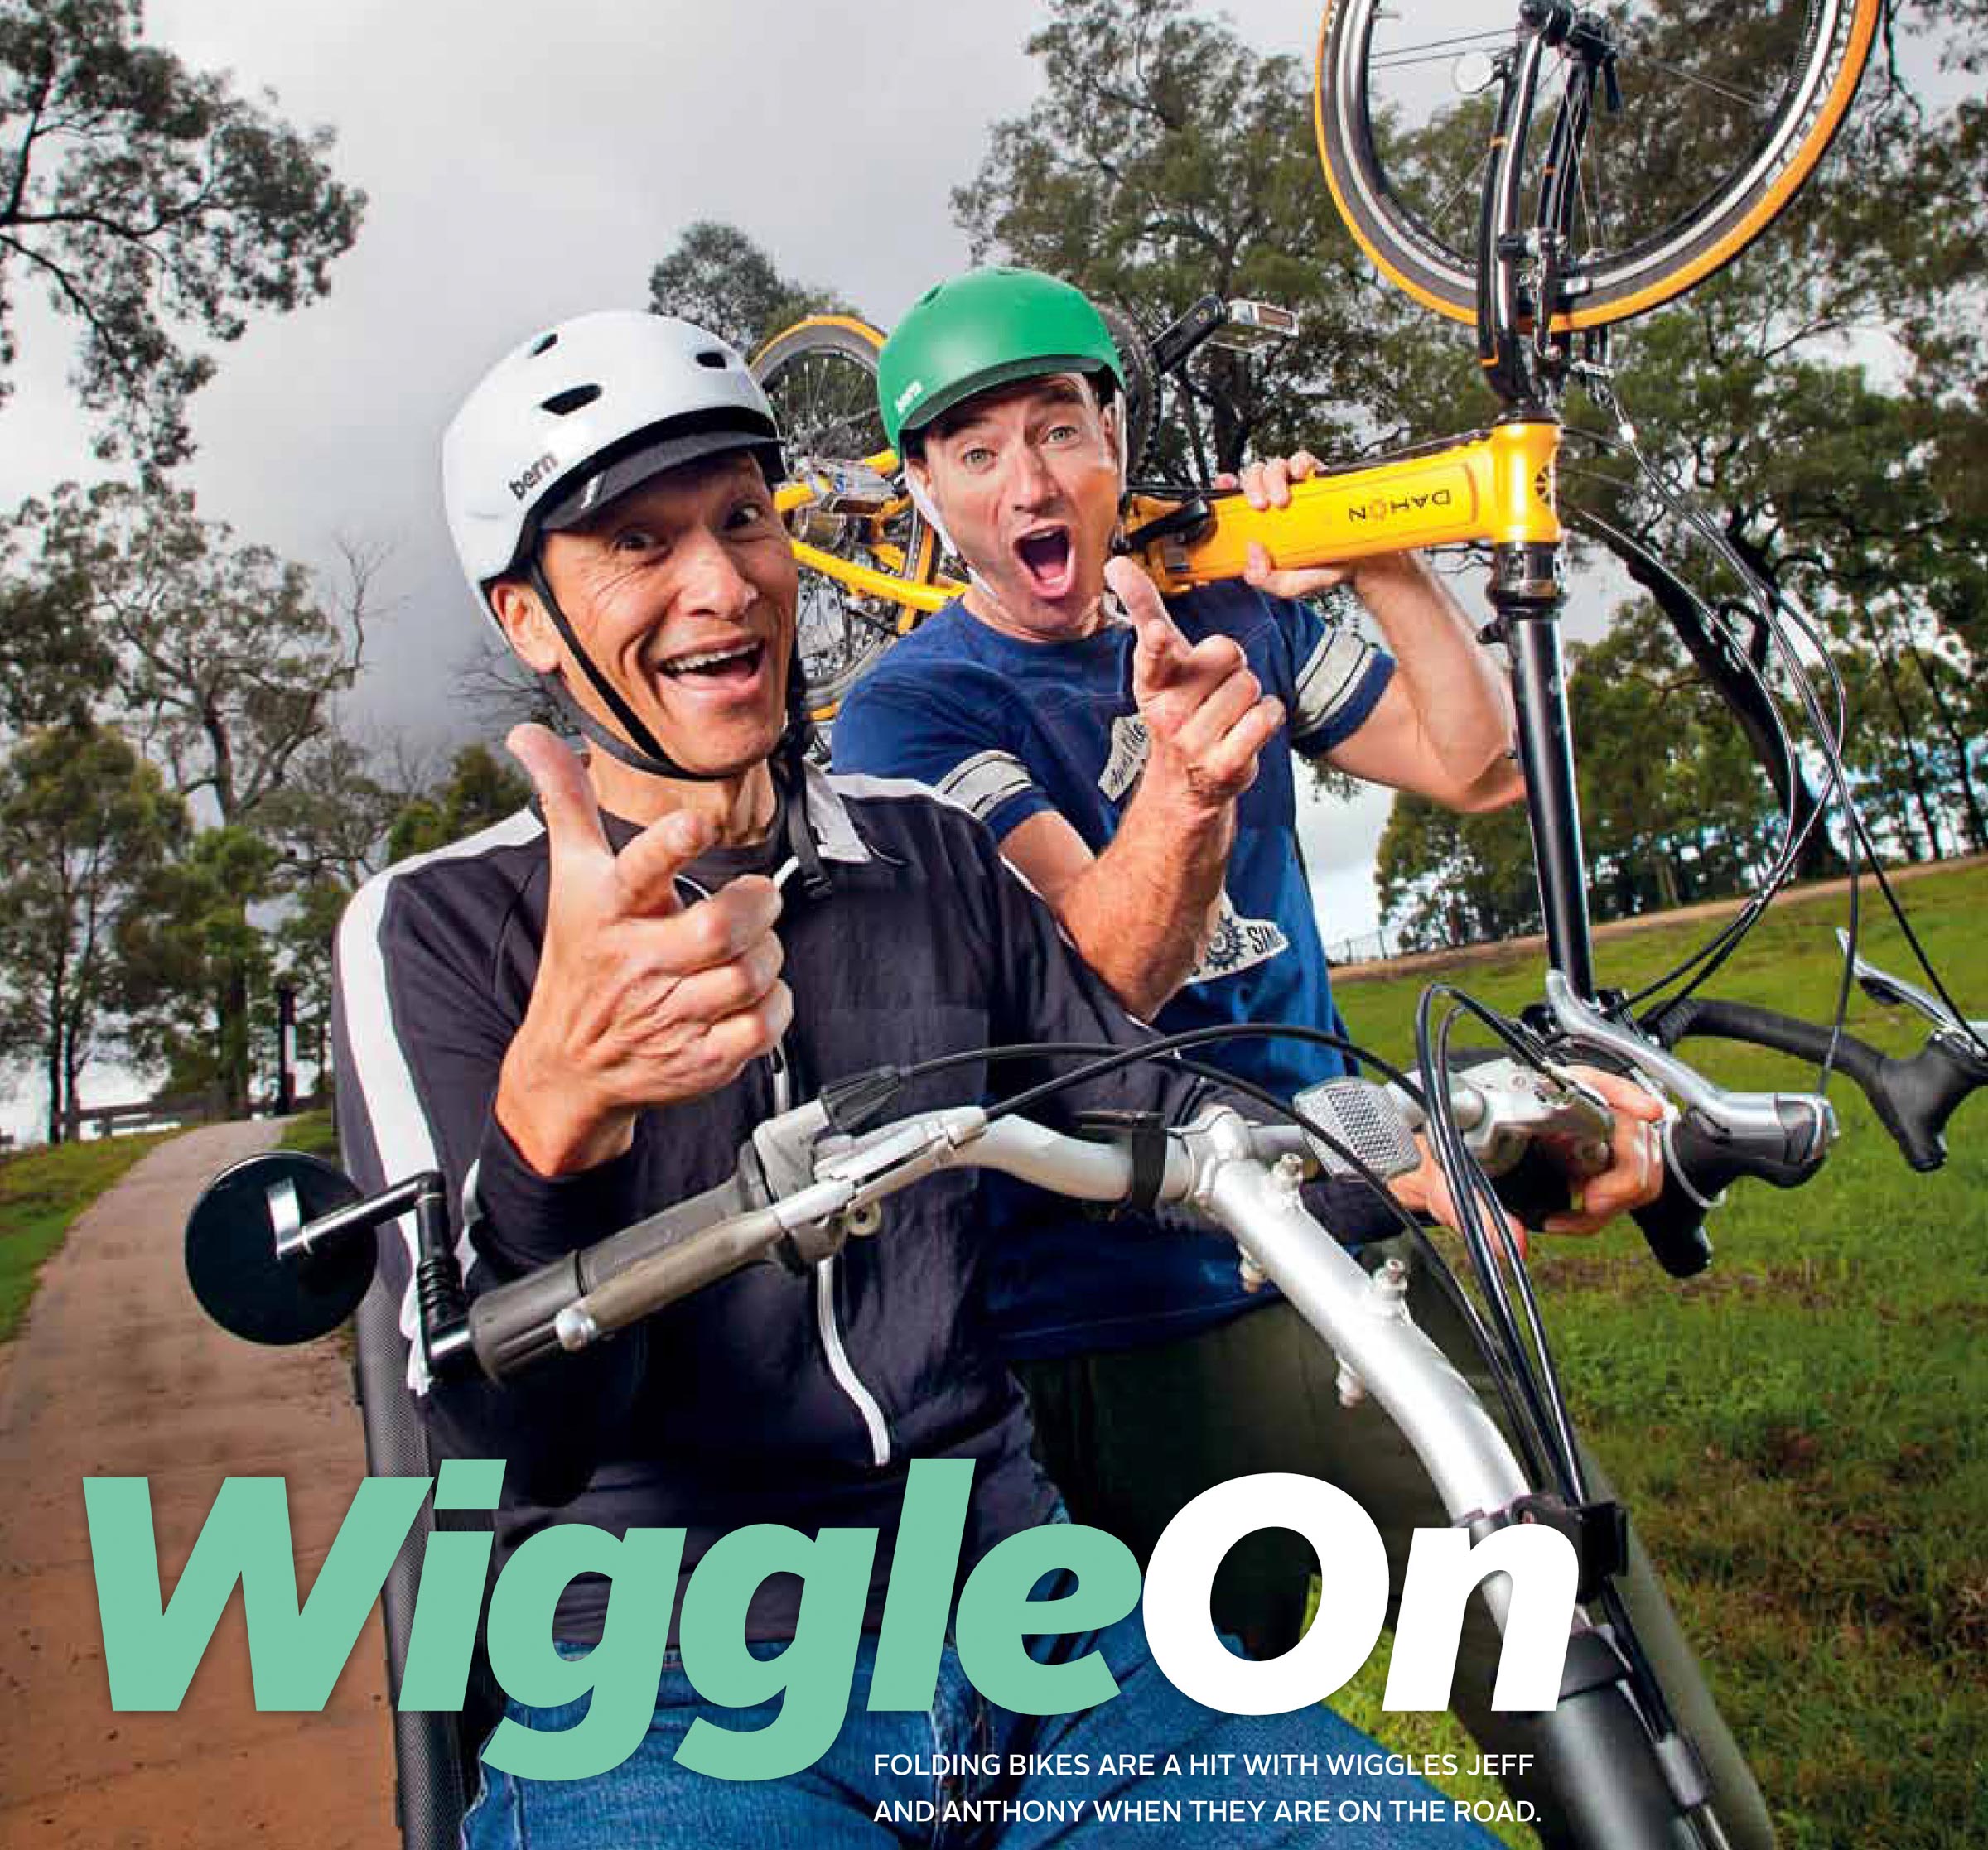 Location editorial photography of Jeff and Anthony Wiggles in a park holding bicycles pointing at camera